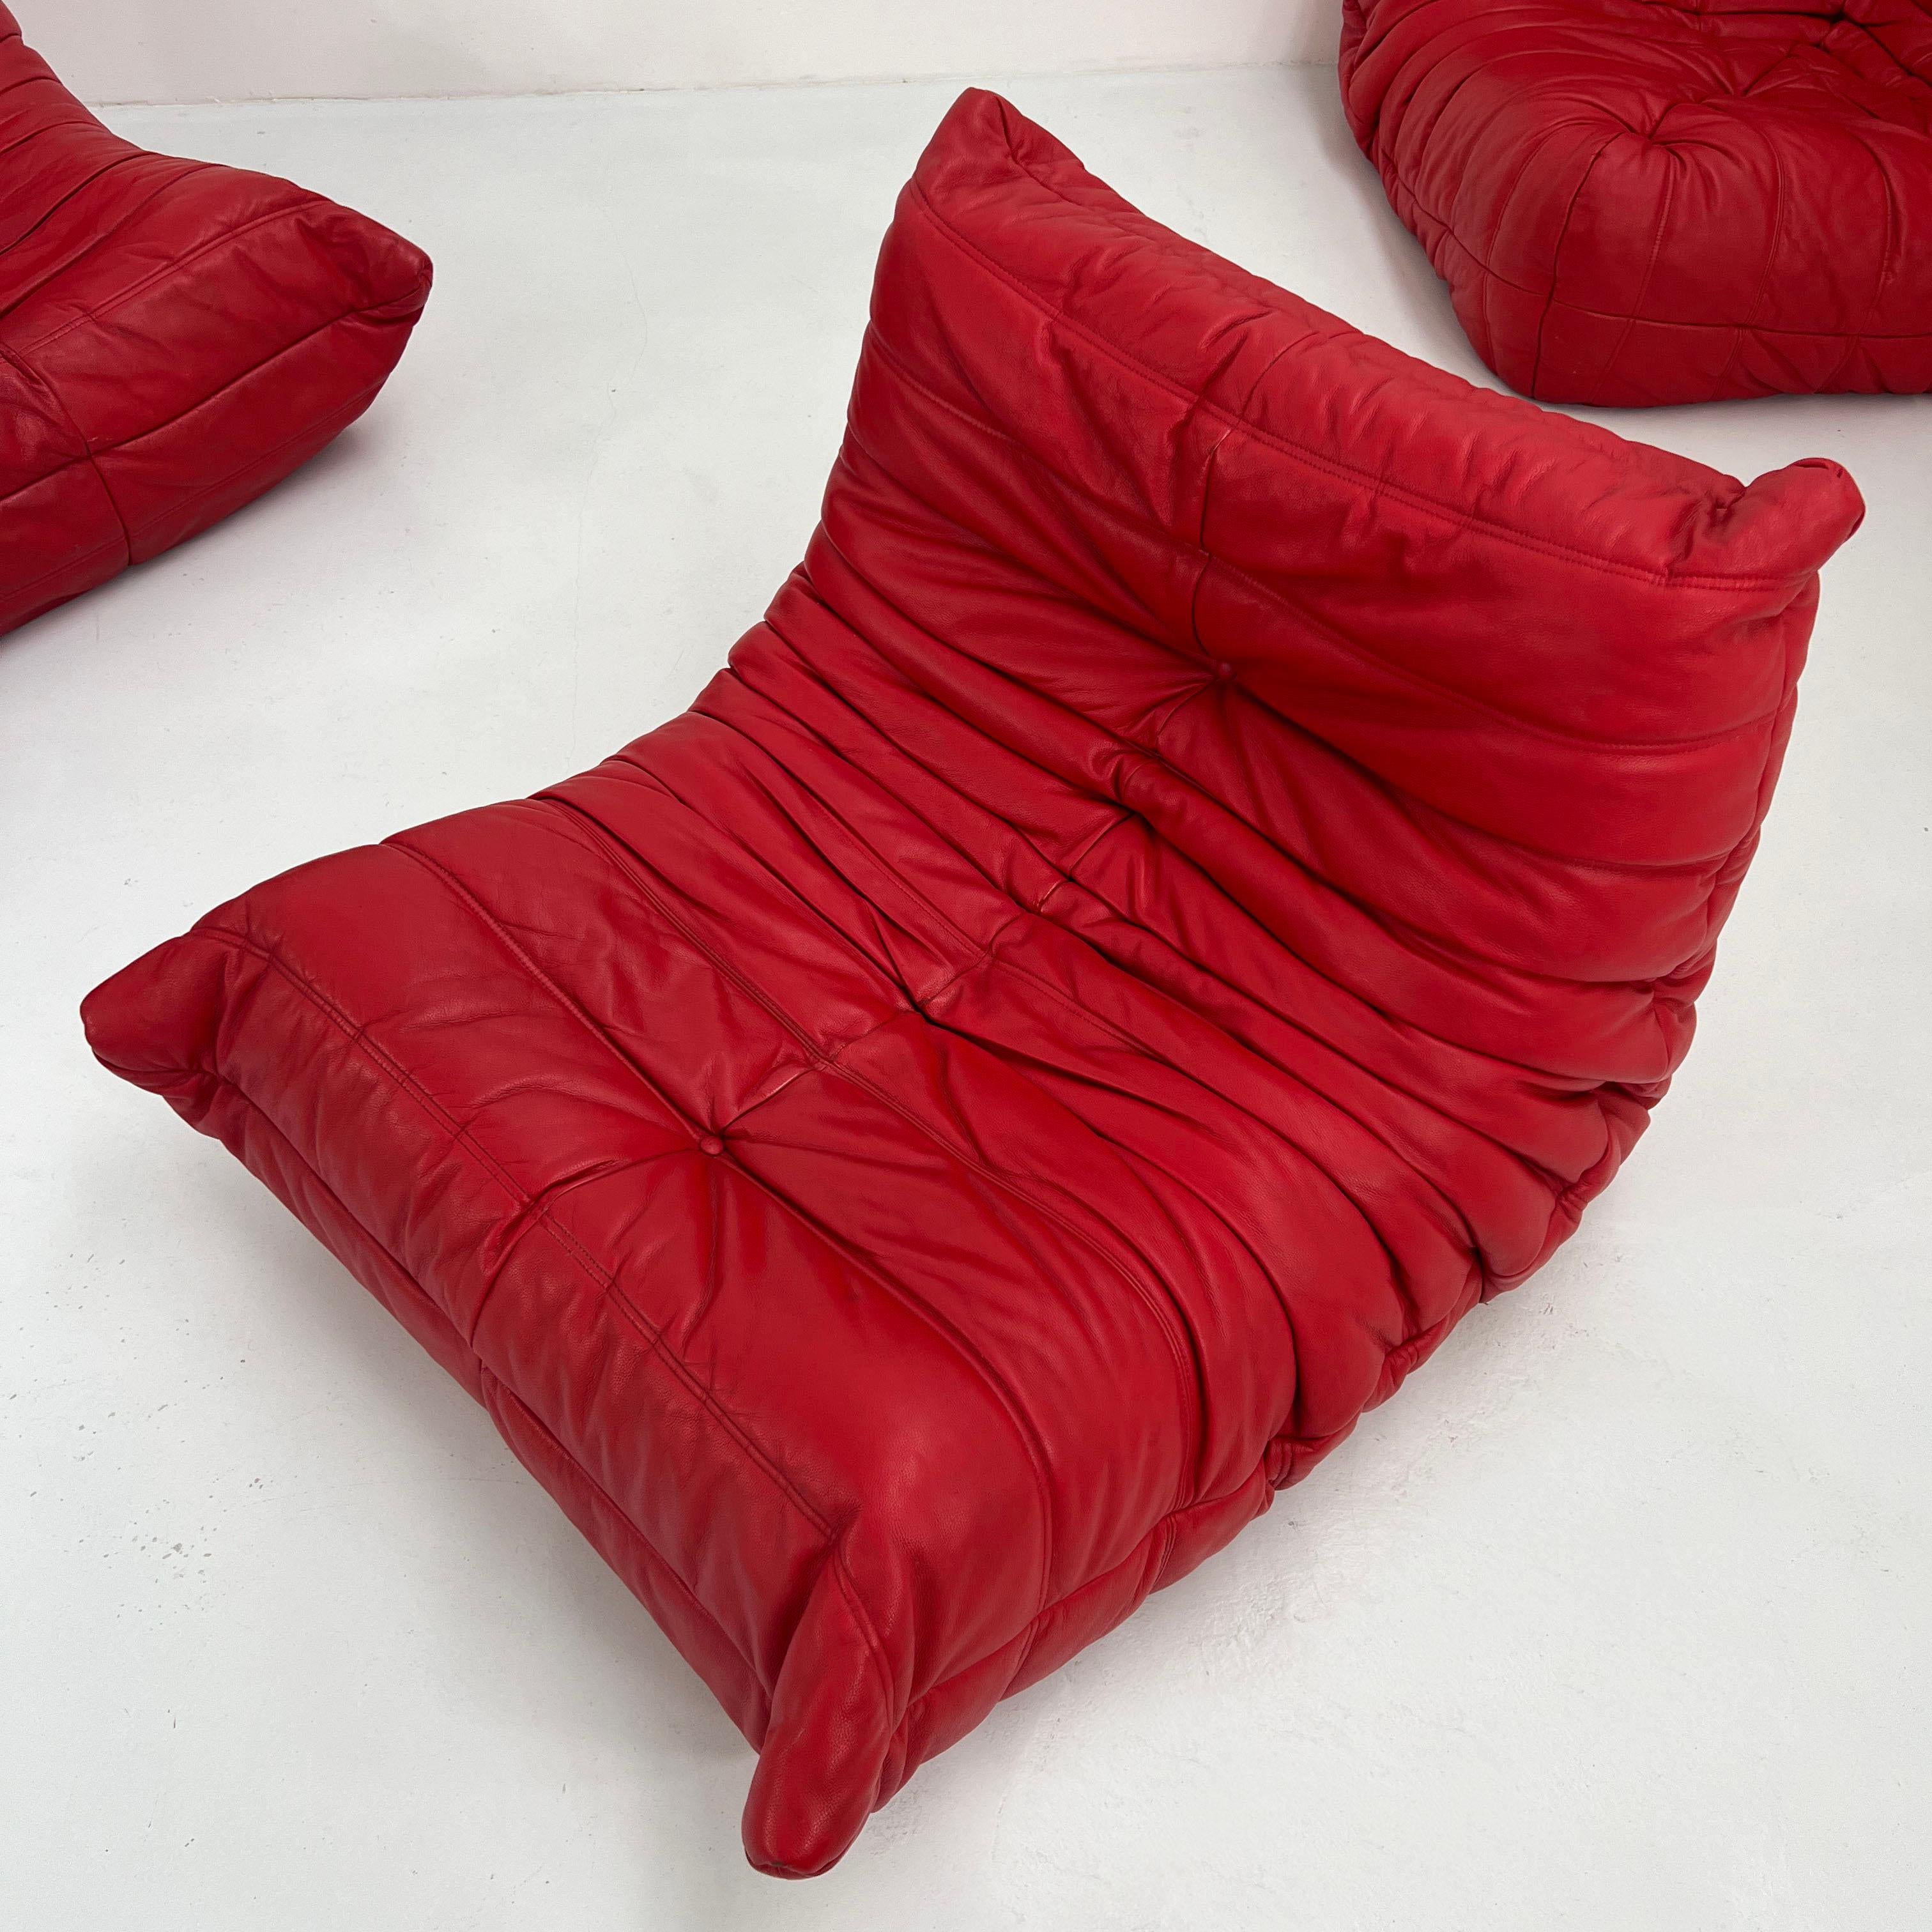 Togo Sofa Set in Red Leather by Michel Ducaroy for Ligne Roset, 1970s For Sale 8